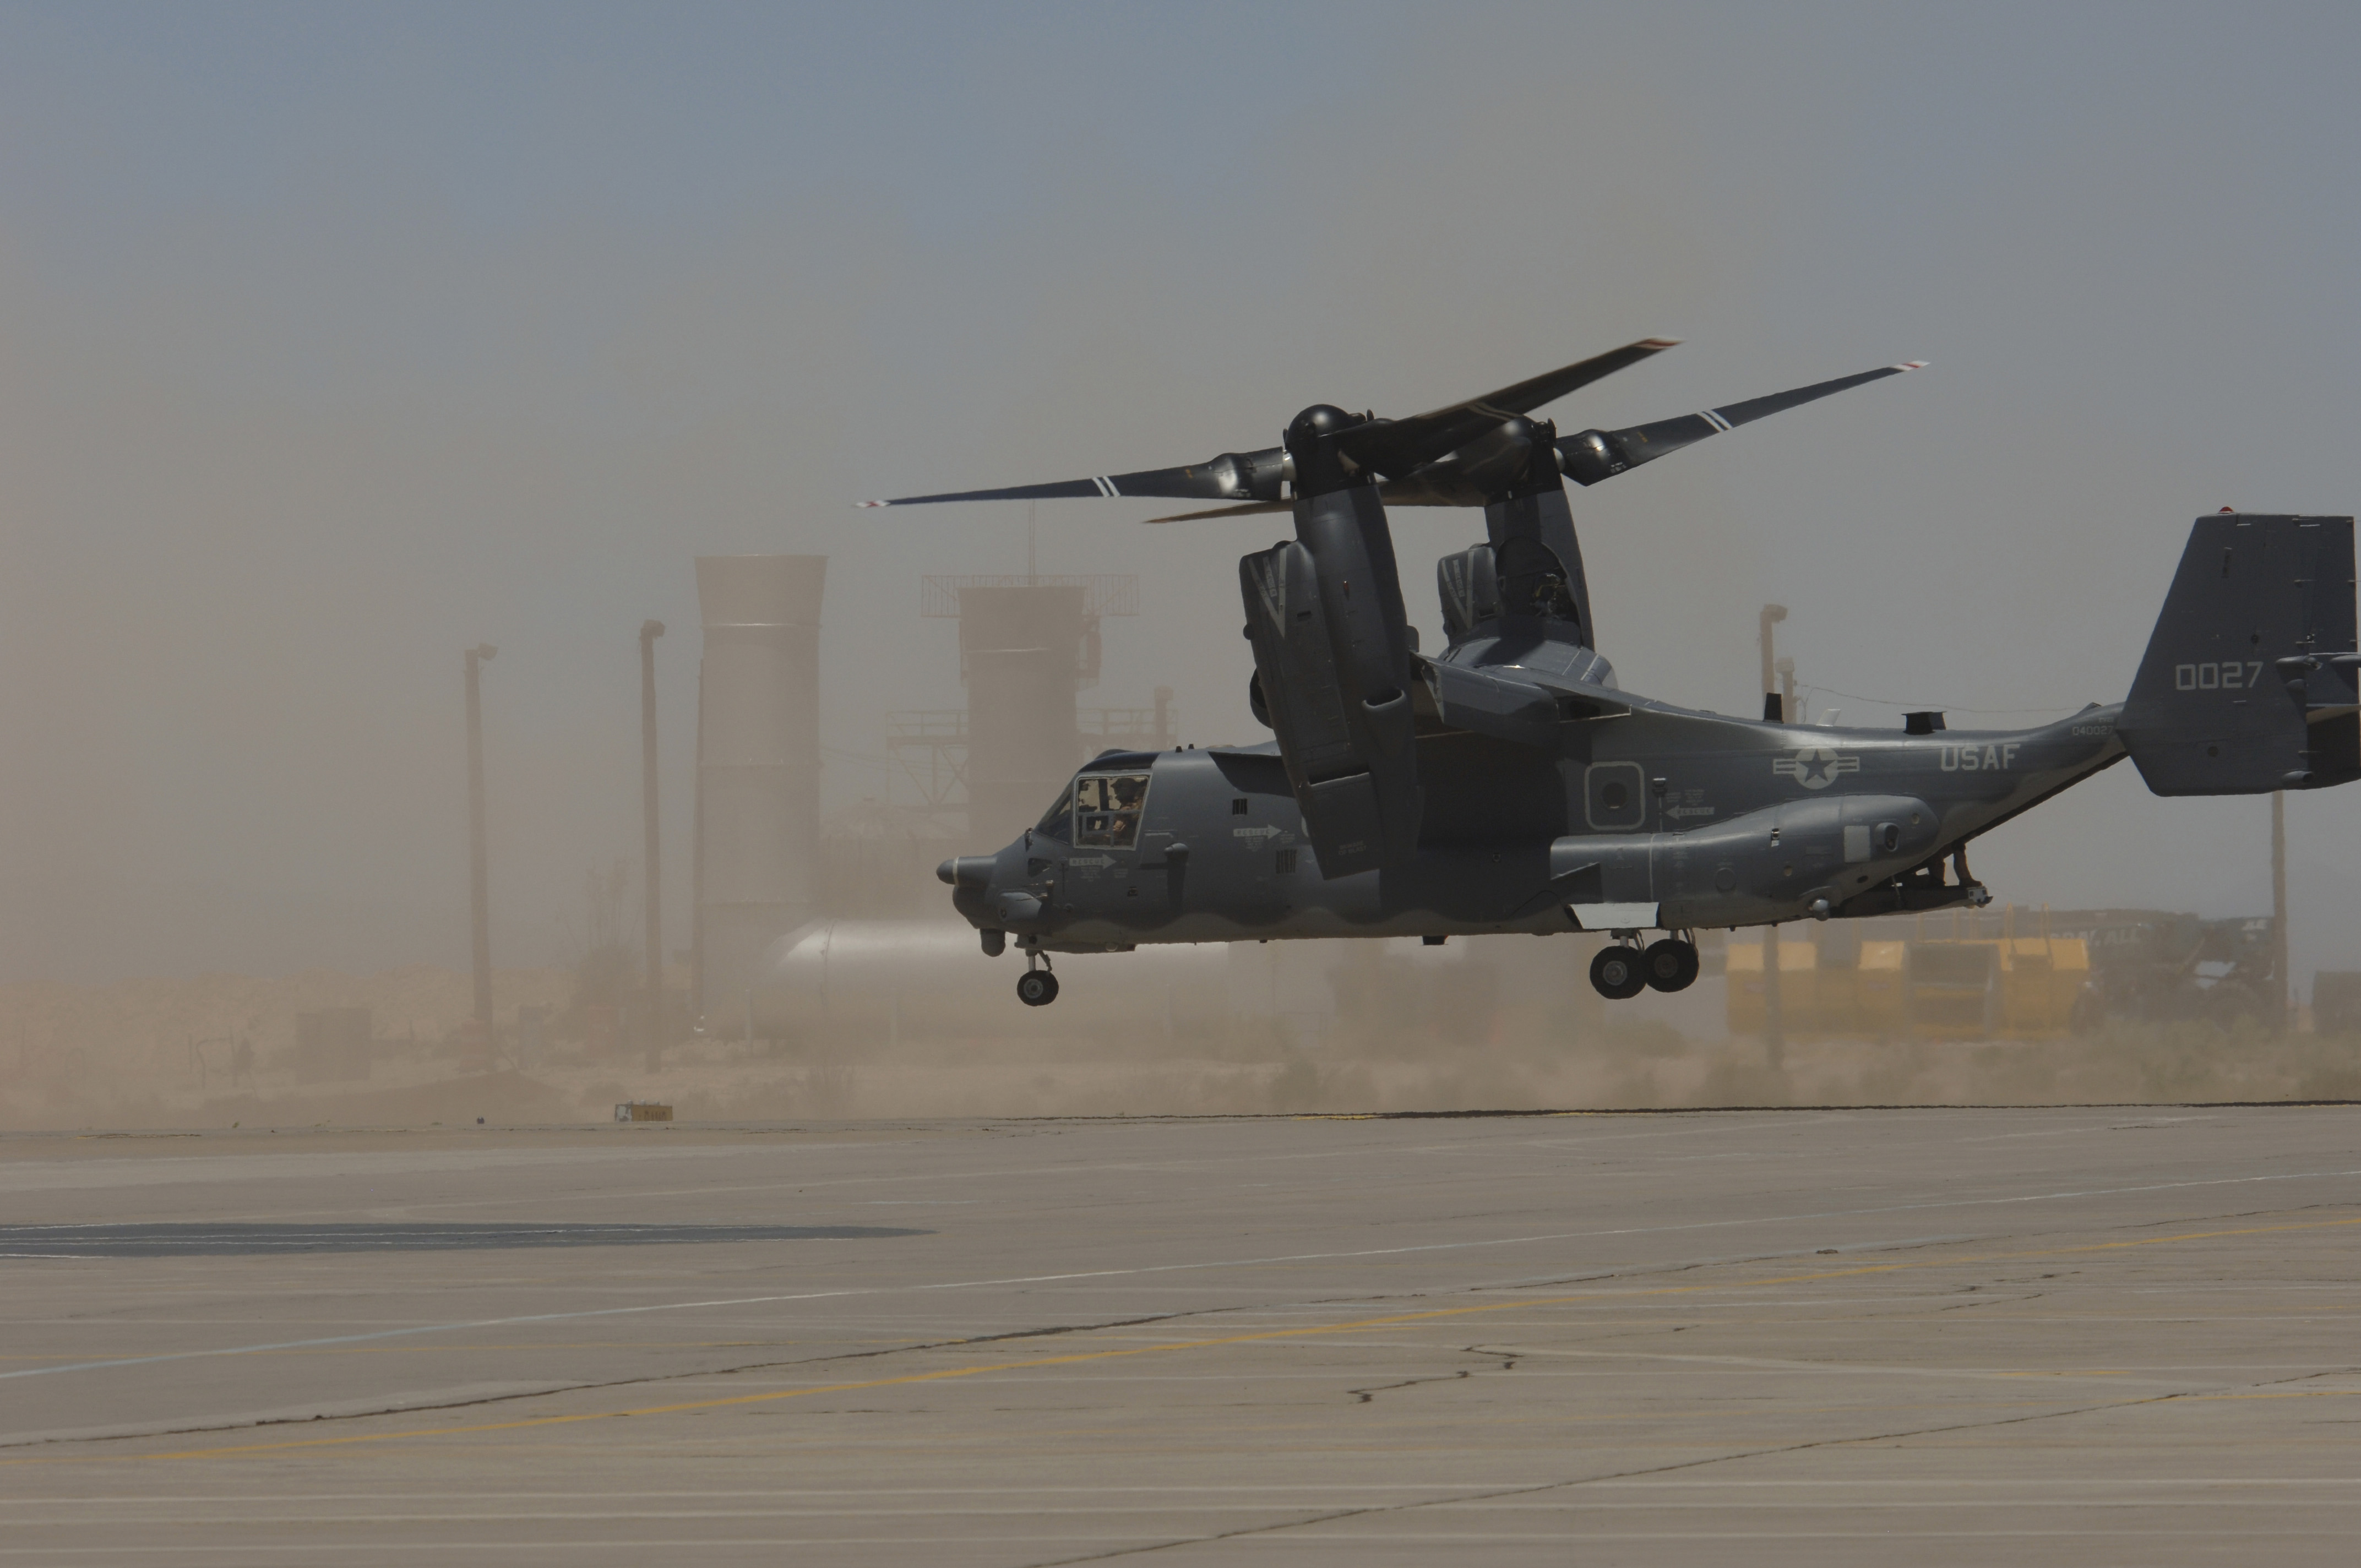 CV-22 Osprey taking off at Holloman AFB during filming of Transformers 2006-05-26